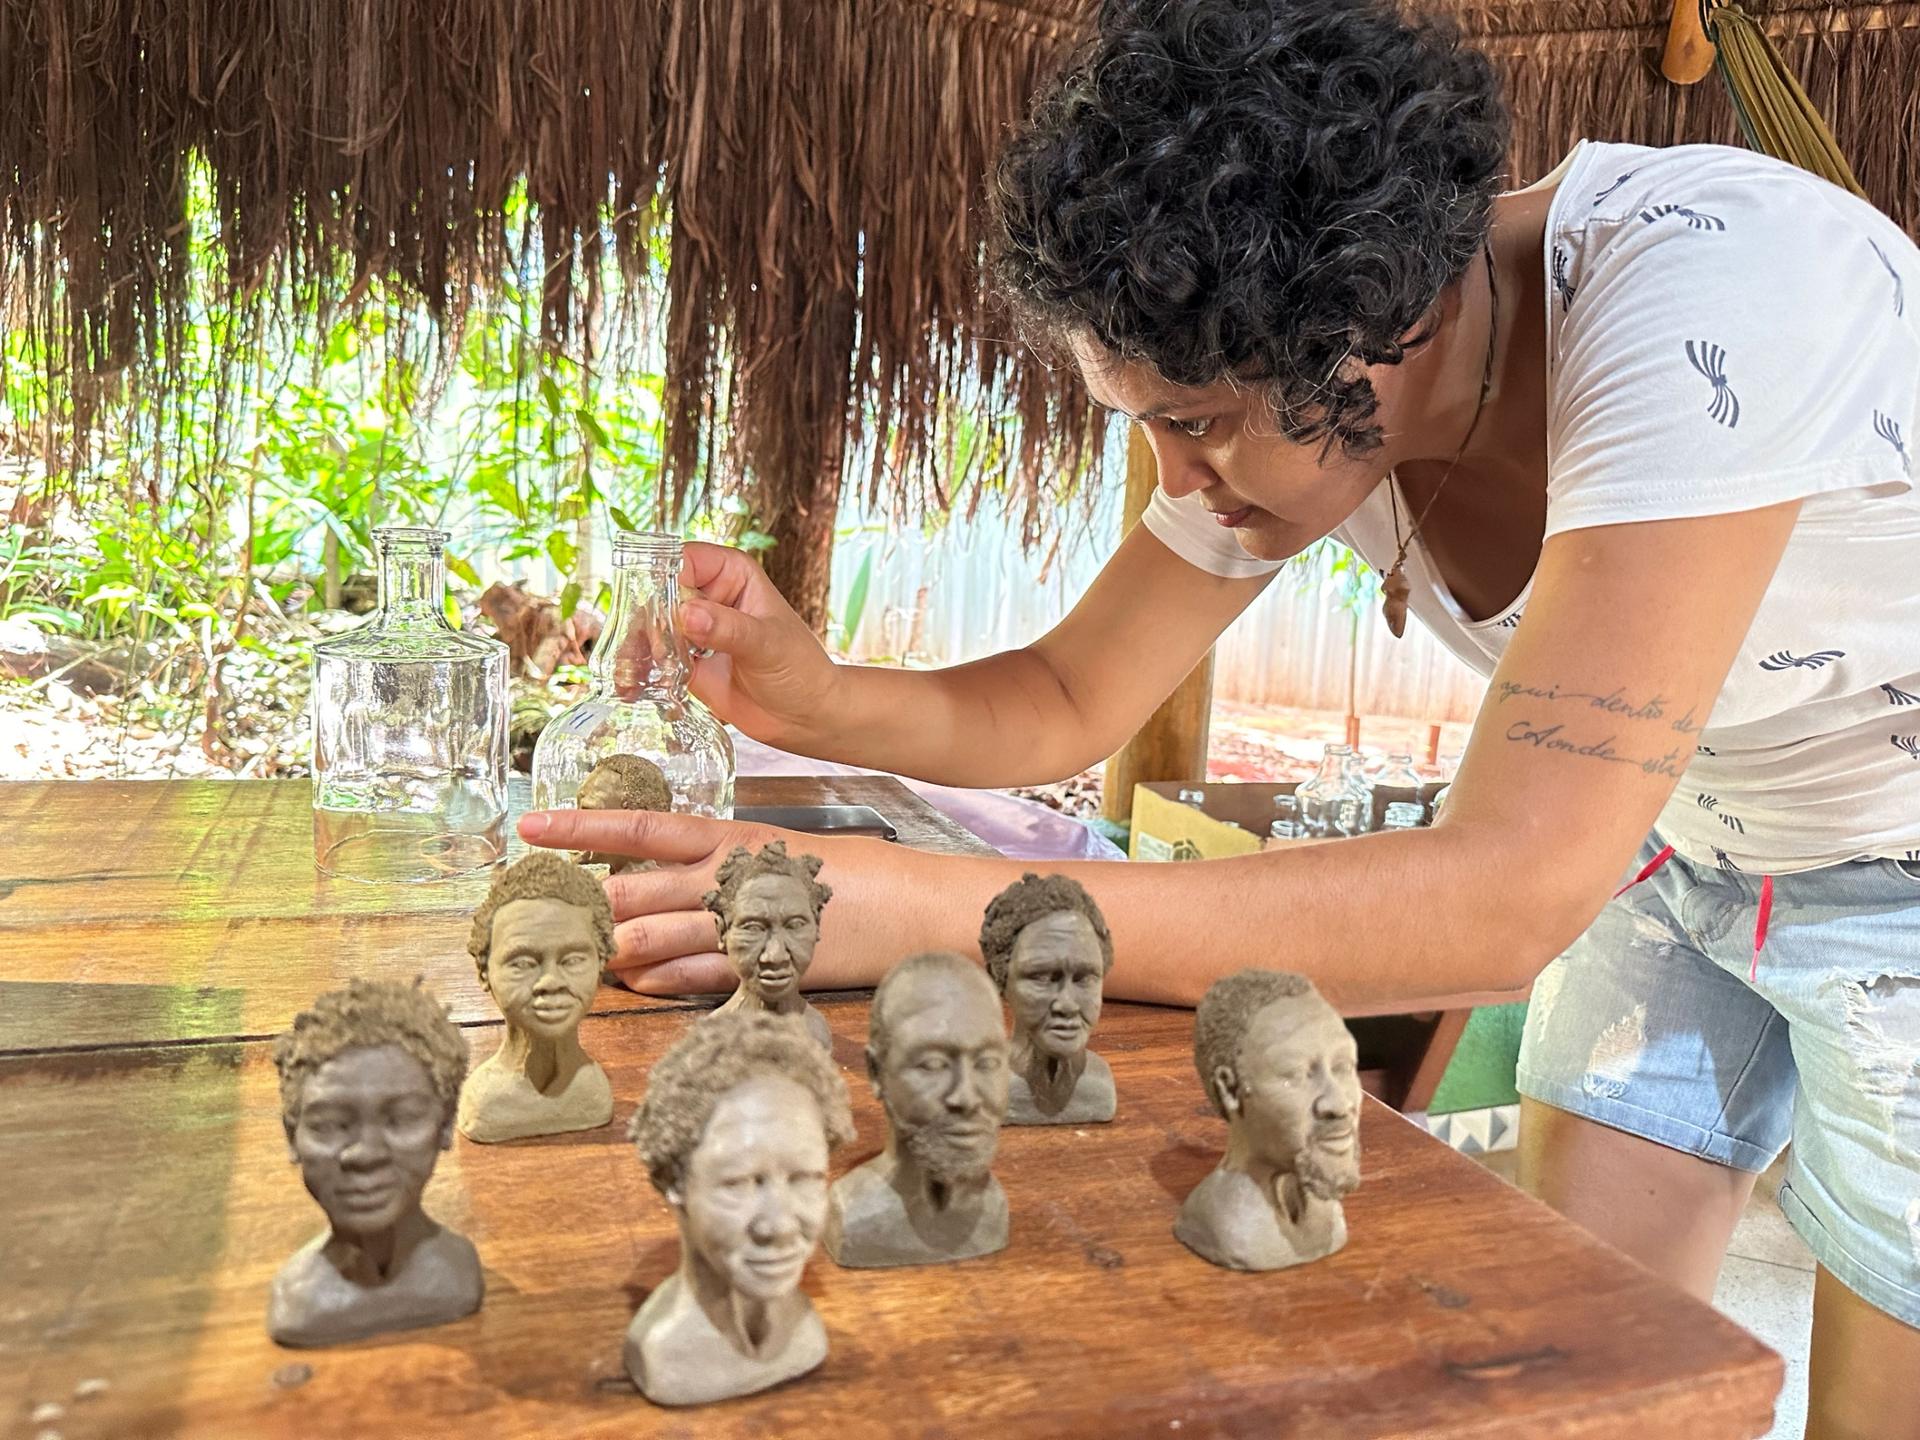 Lucelia Maciel is one of Dalton’s assistants and she also produces her own work, like these sculptures of lamps with tiny busts of people from her home state of Bahia.